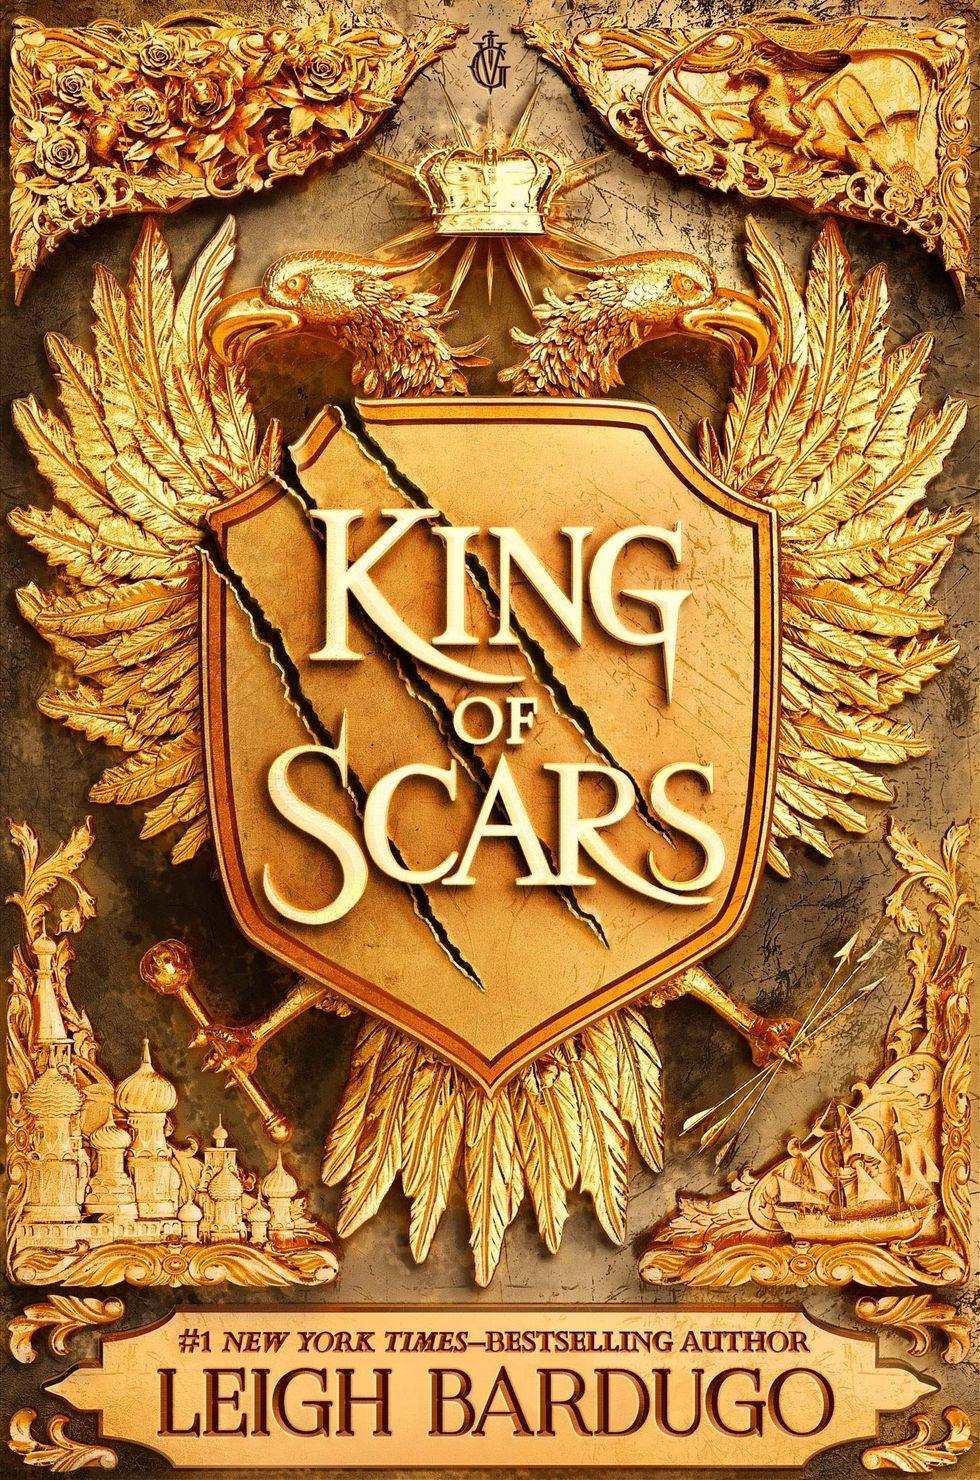 "King of Scars"